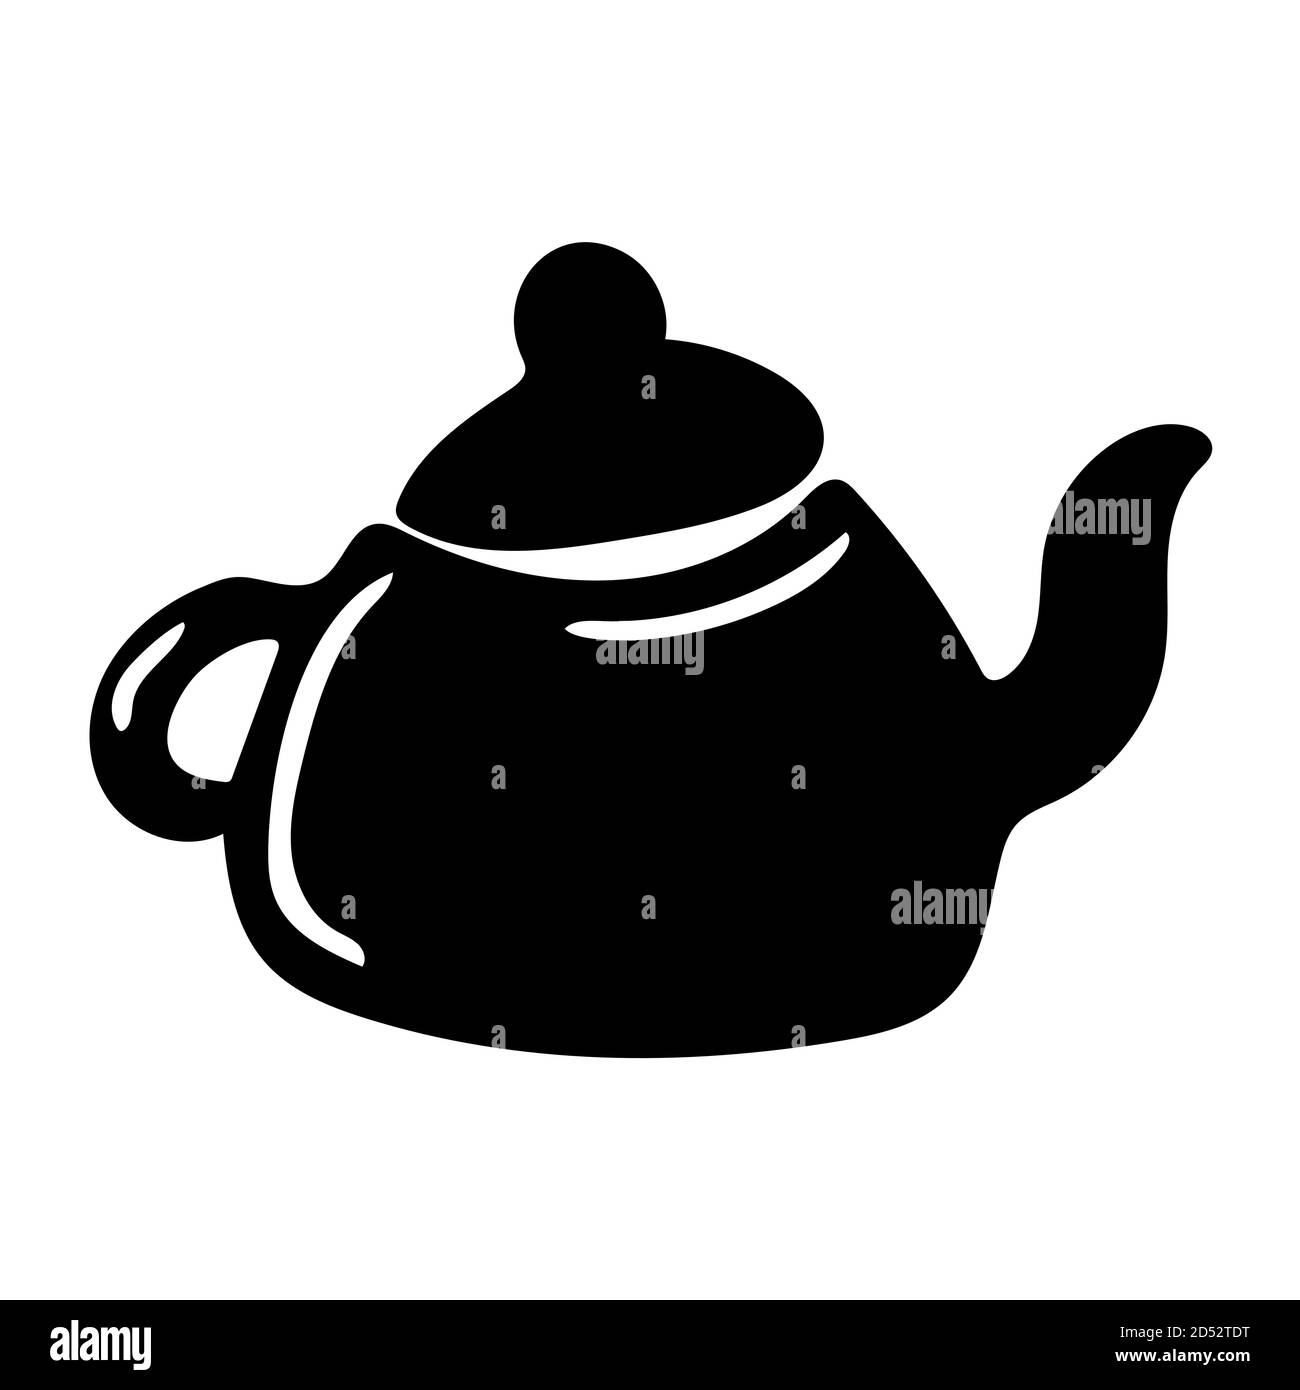 https://c8.alamy.com/comp/2D52TDT/isolated-black-teapot-in-cartoon-style-2D52TDT.jpg